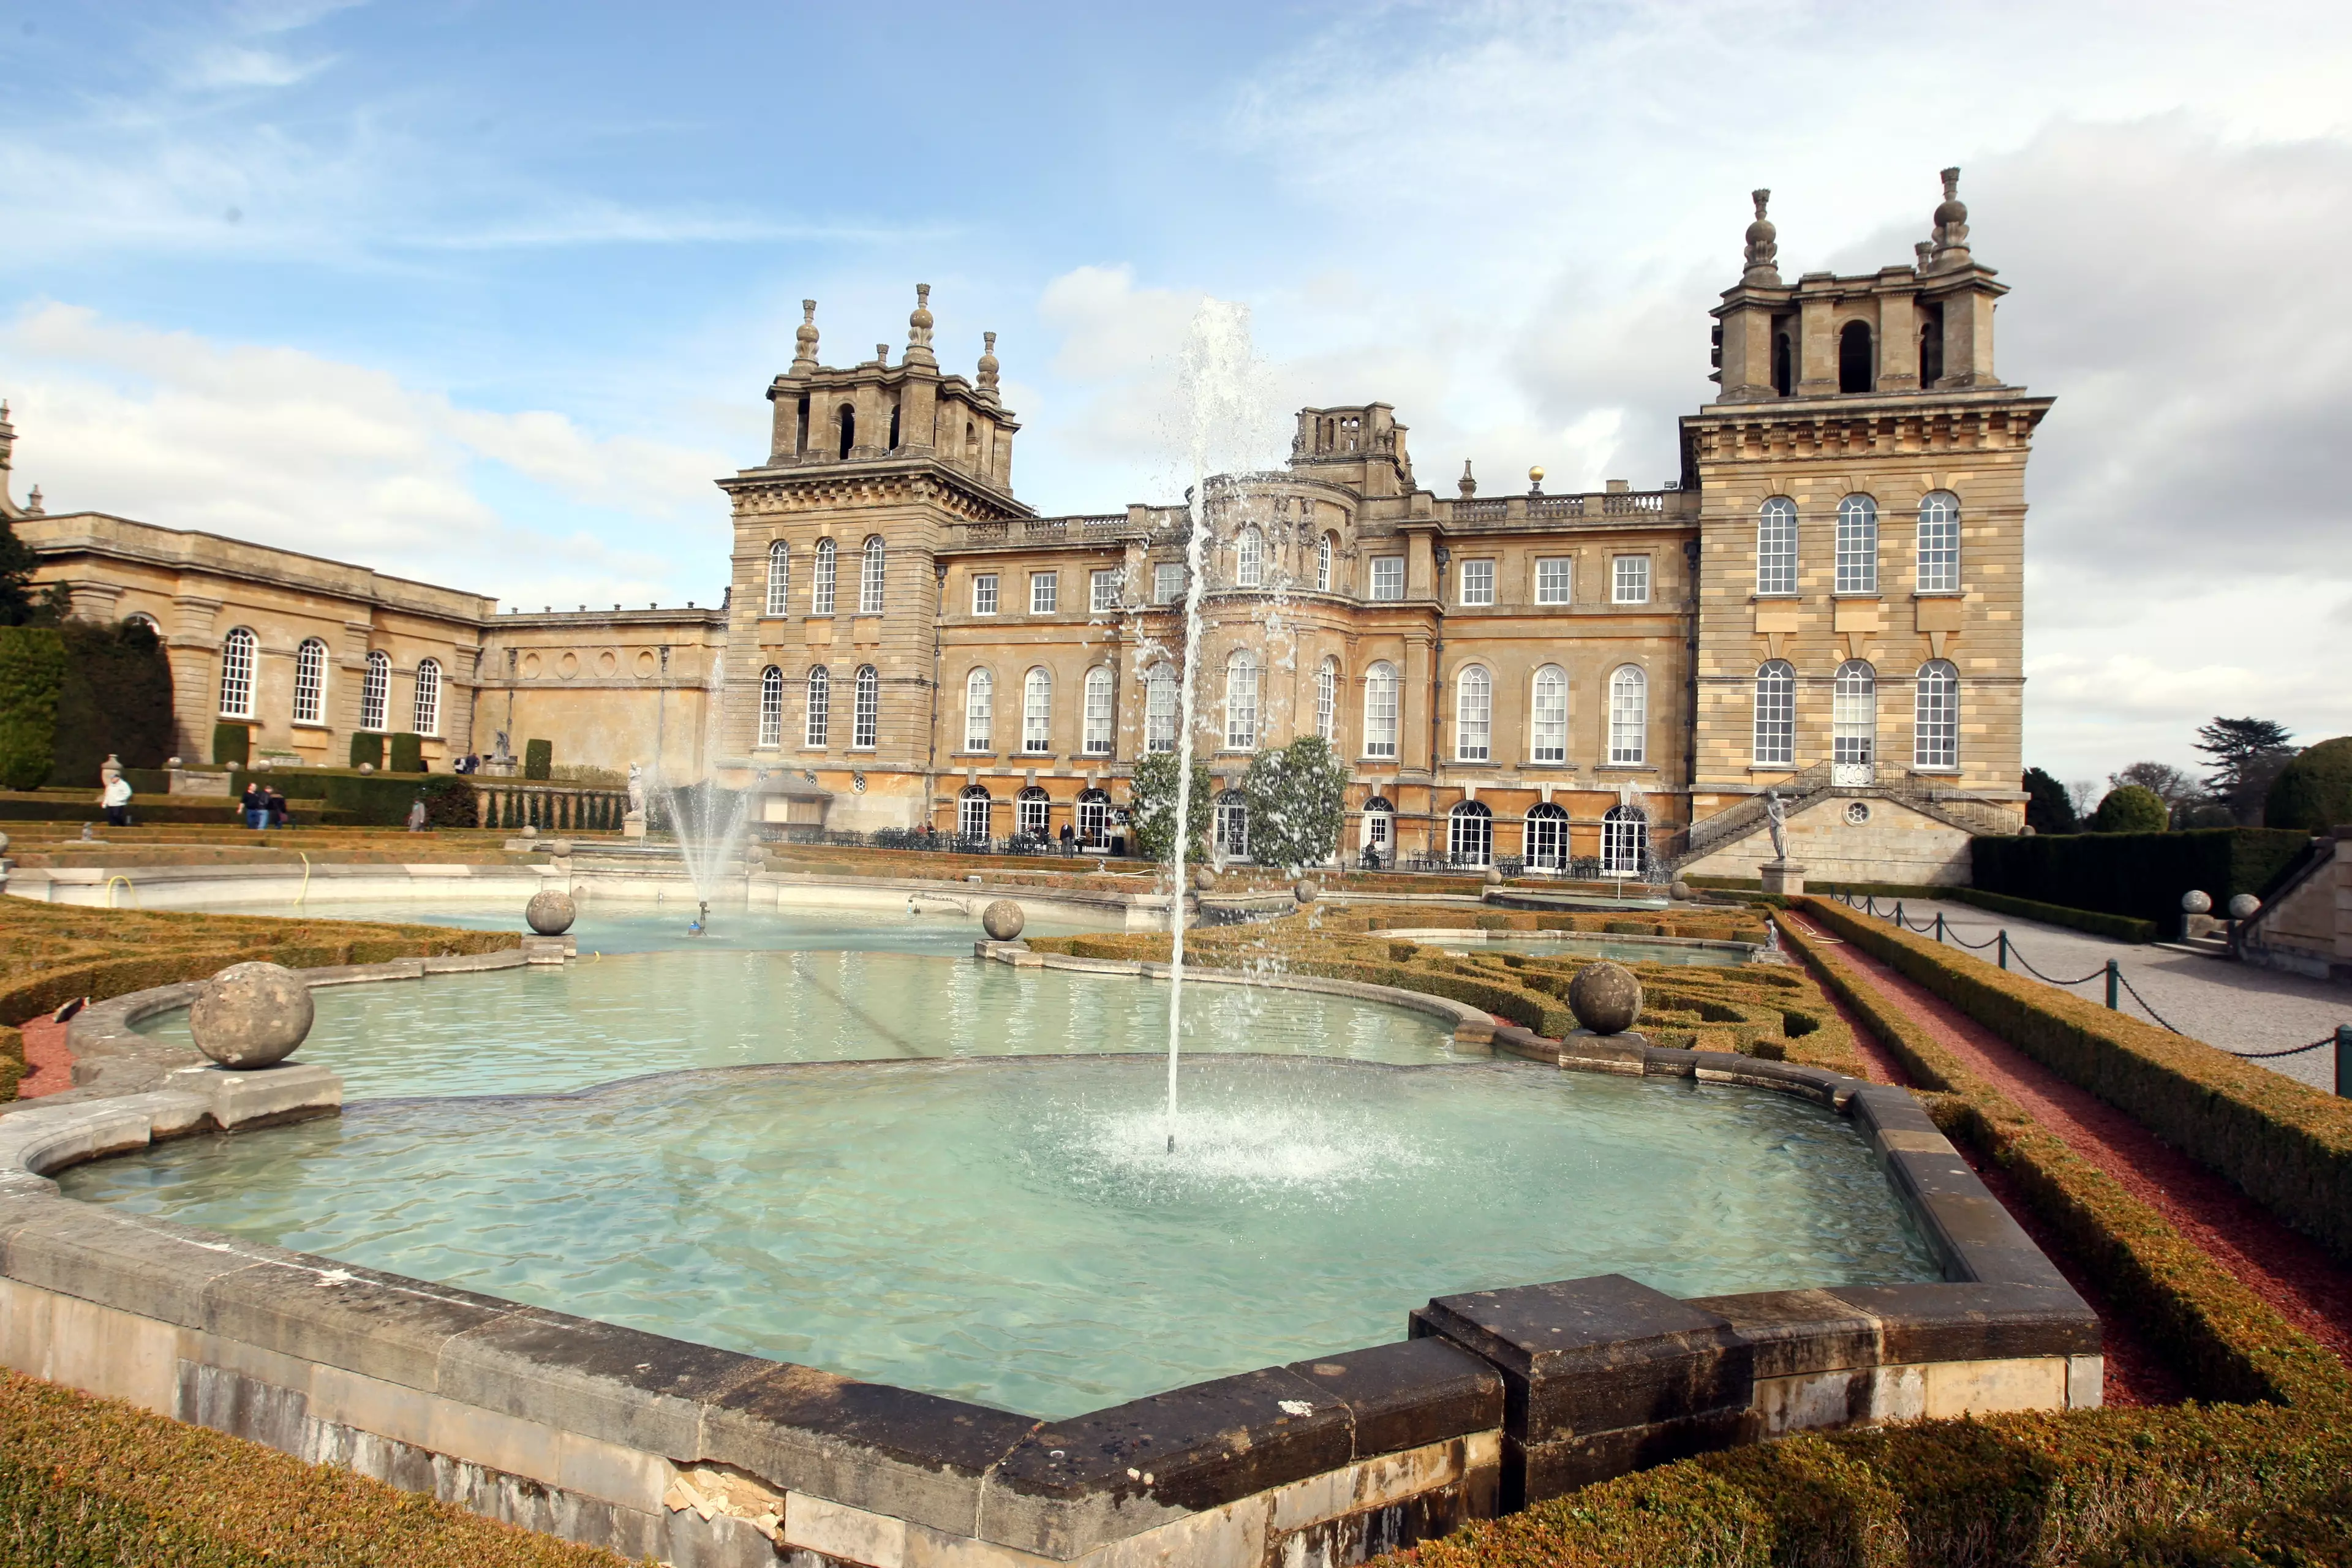 A gold toilet worth £1m has been stolen from Blenheim Palace.